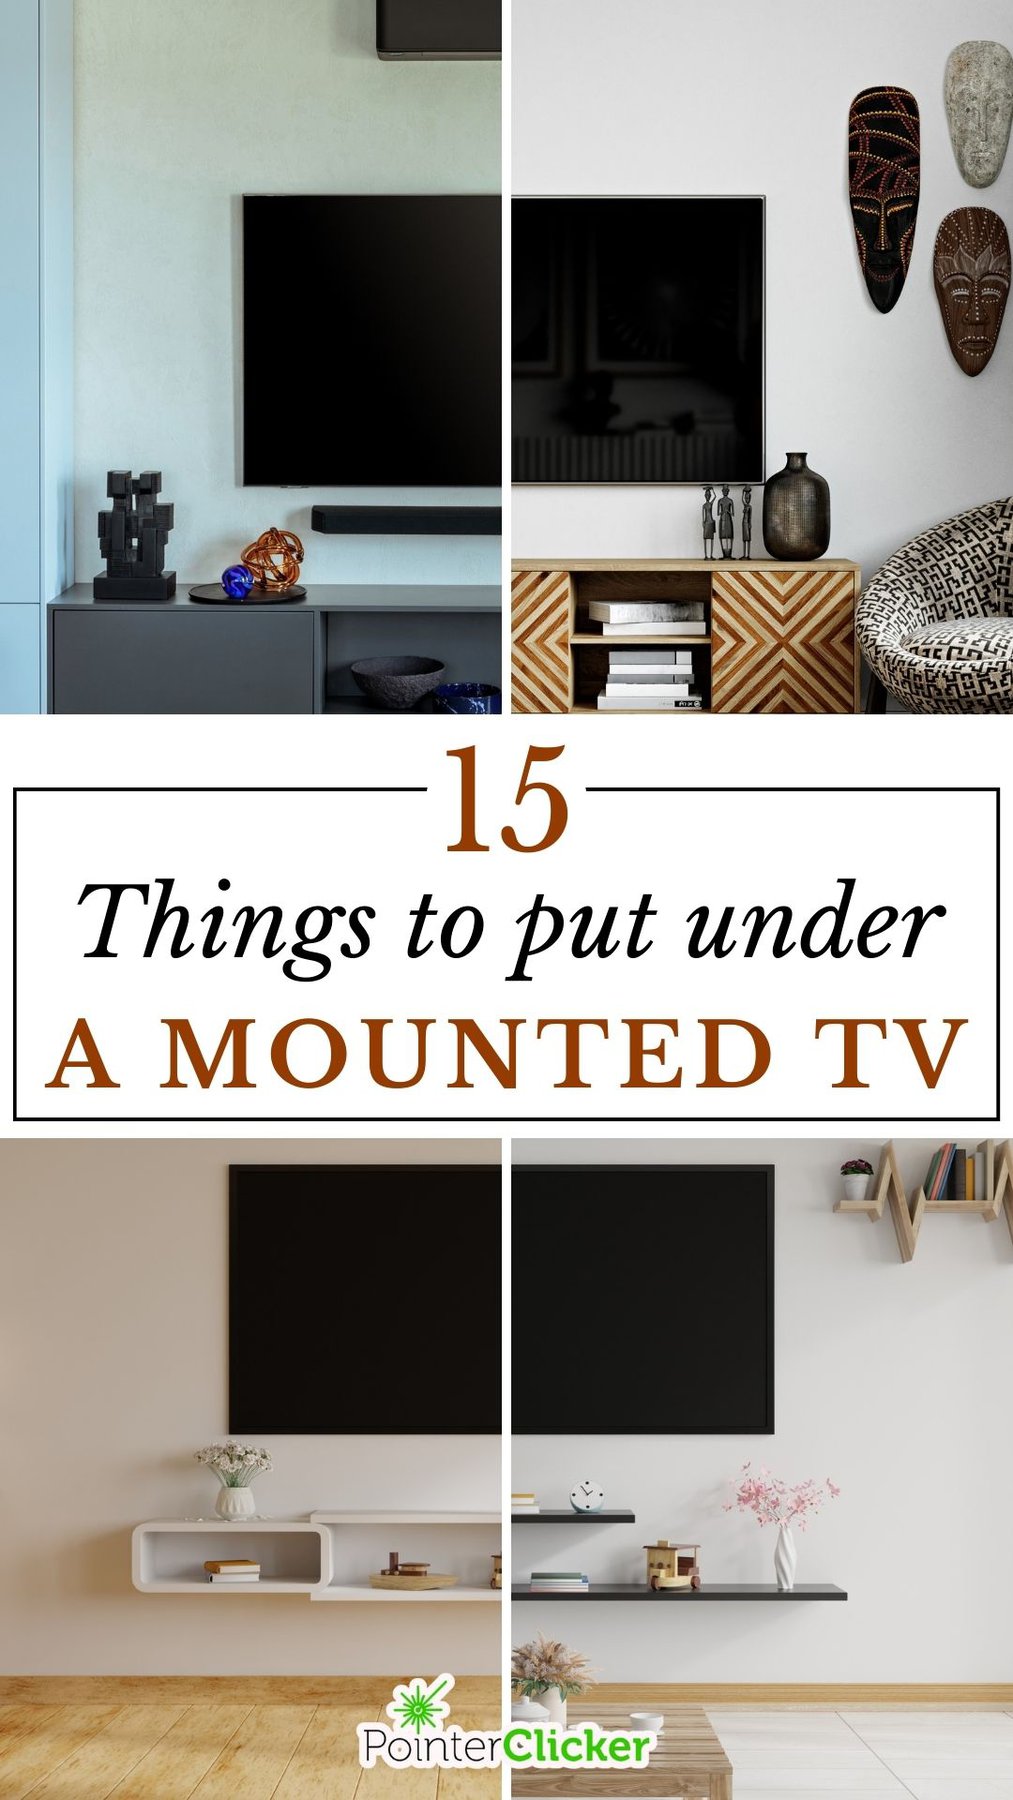 Home Inspo: 15 Things to Put Under a Mounted TV